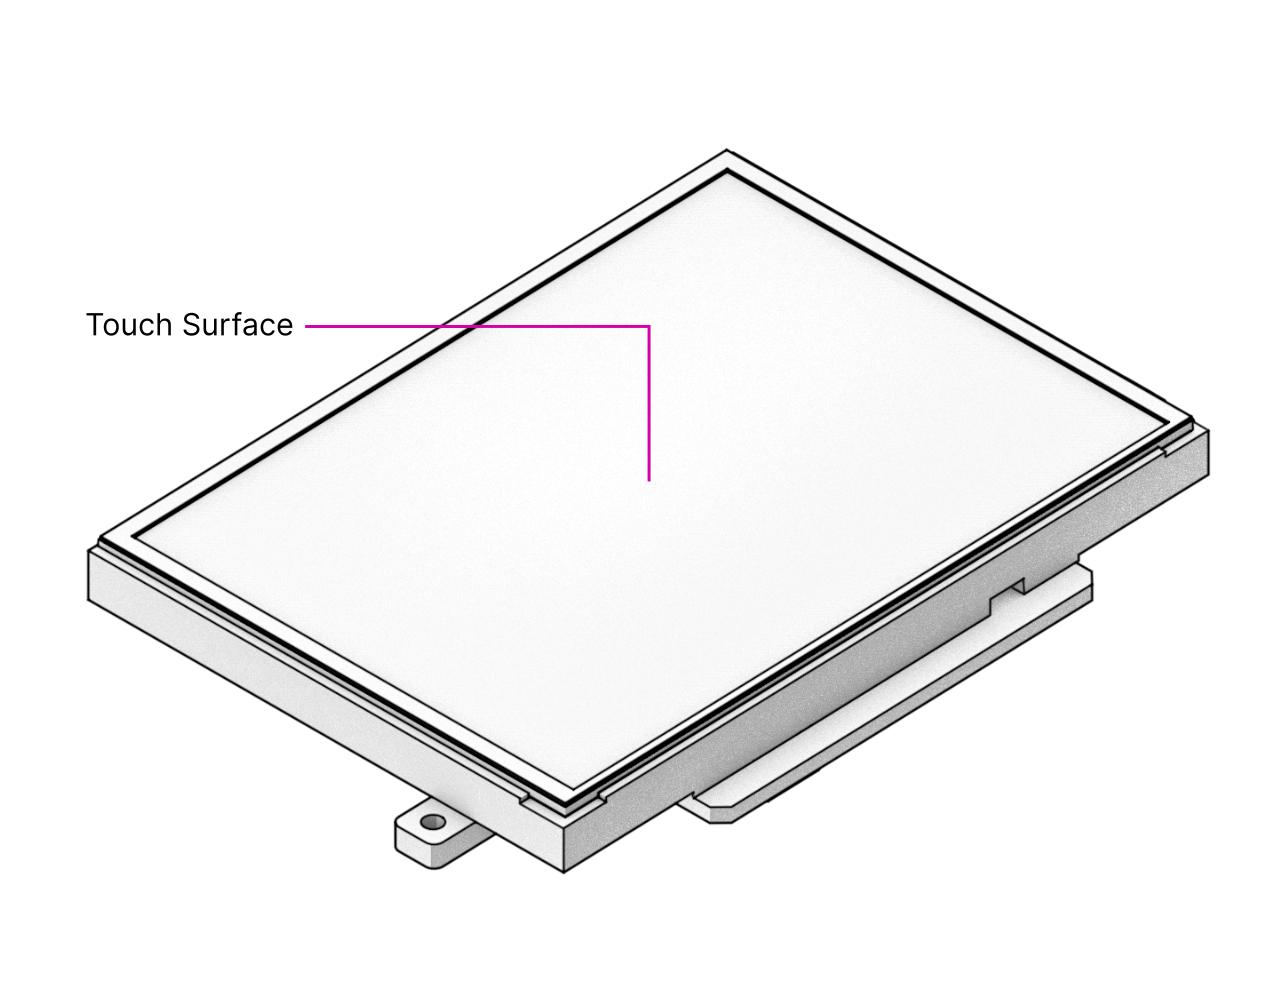 _images/4-trackpad-touch-surface.png